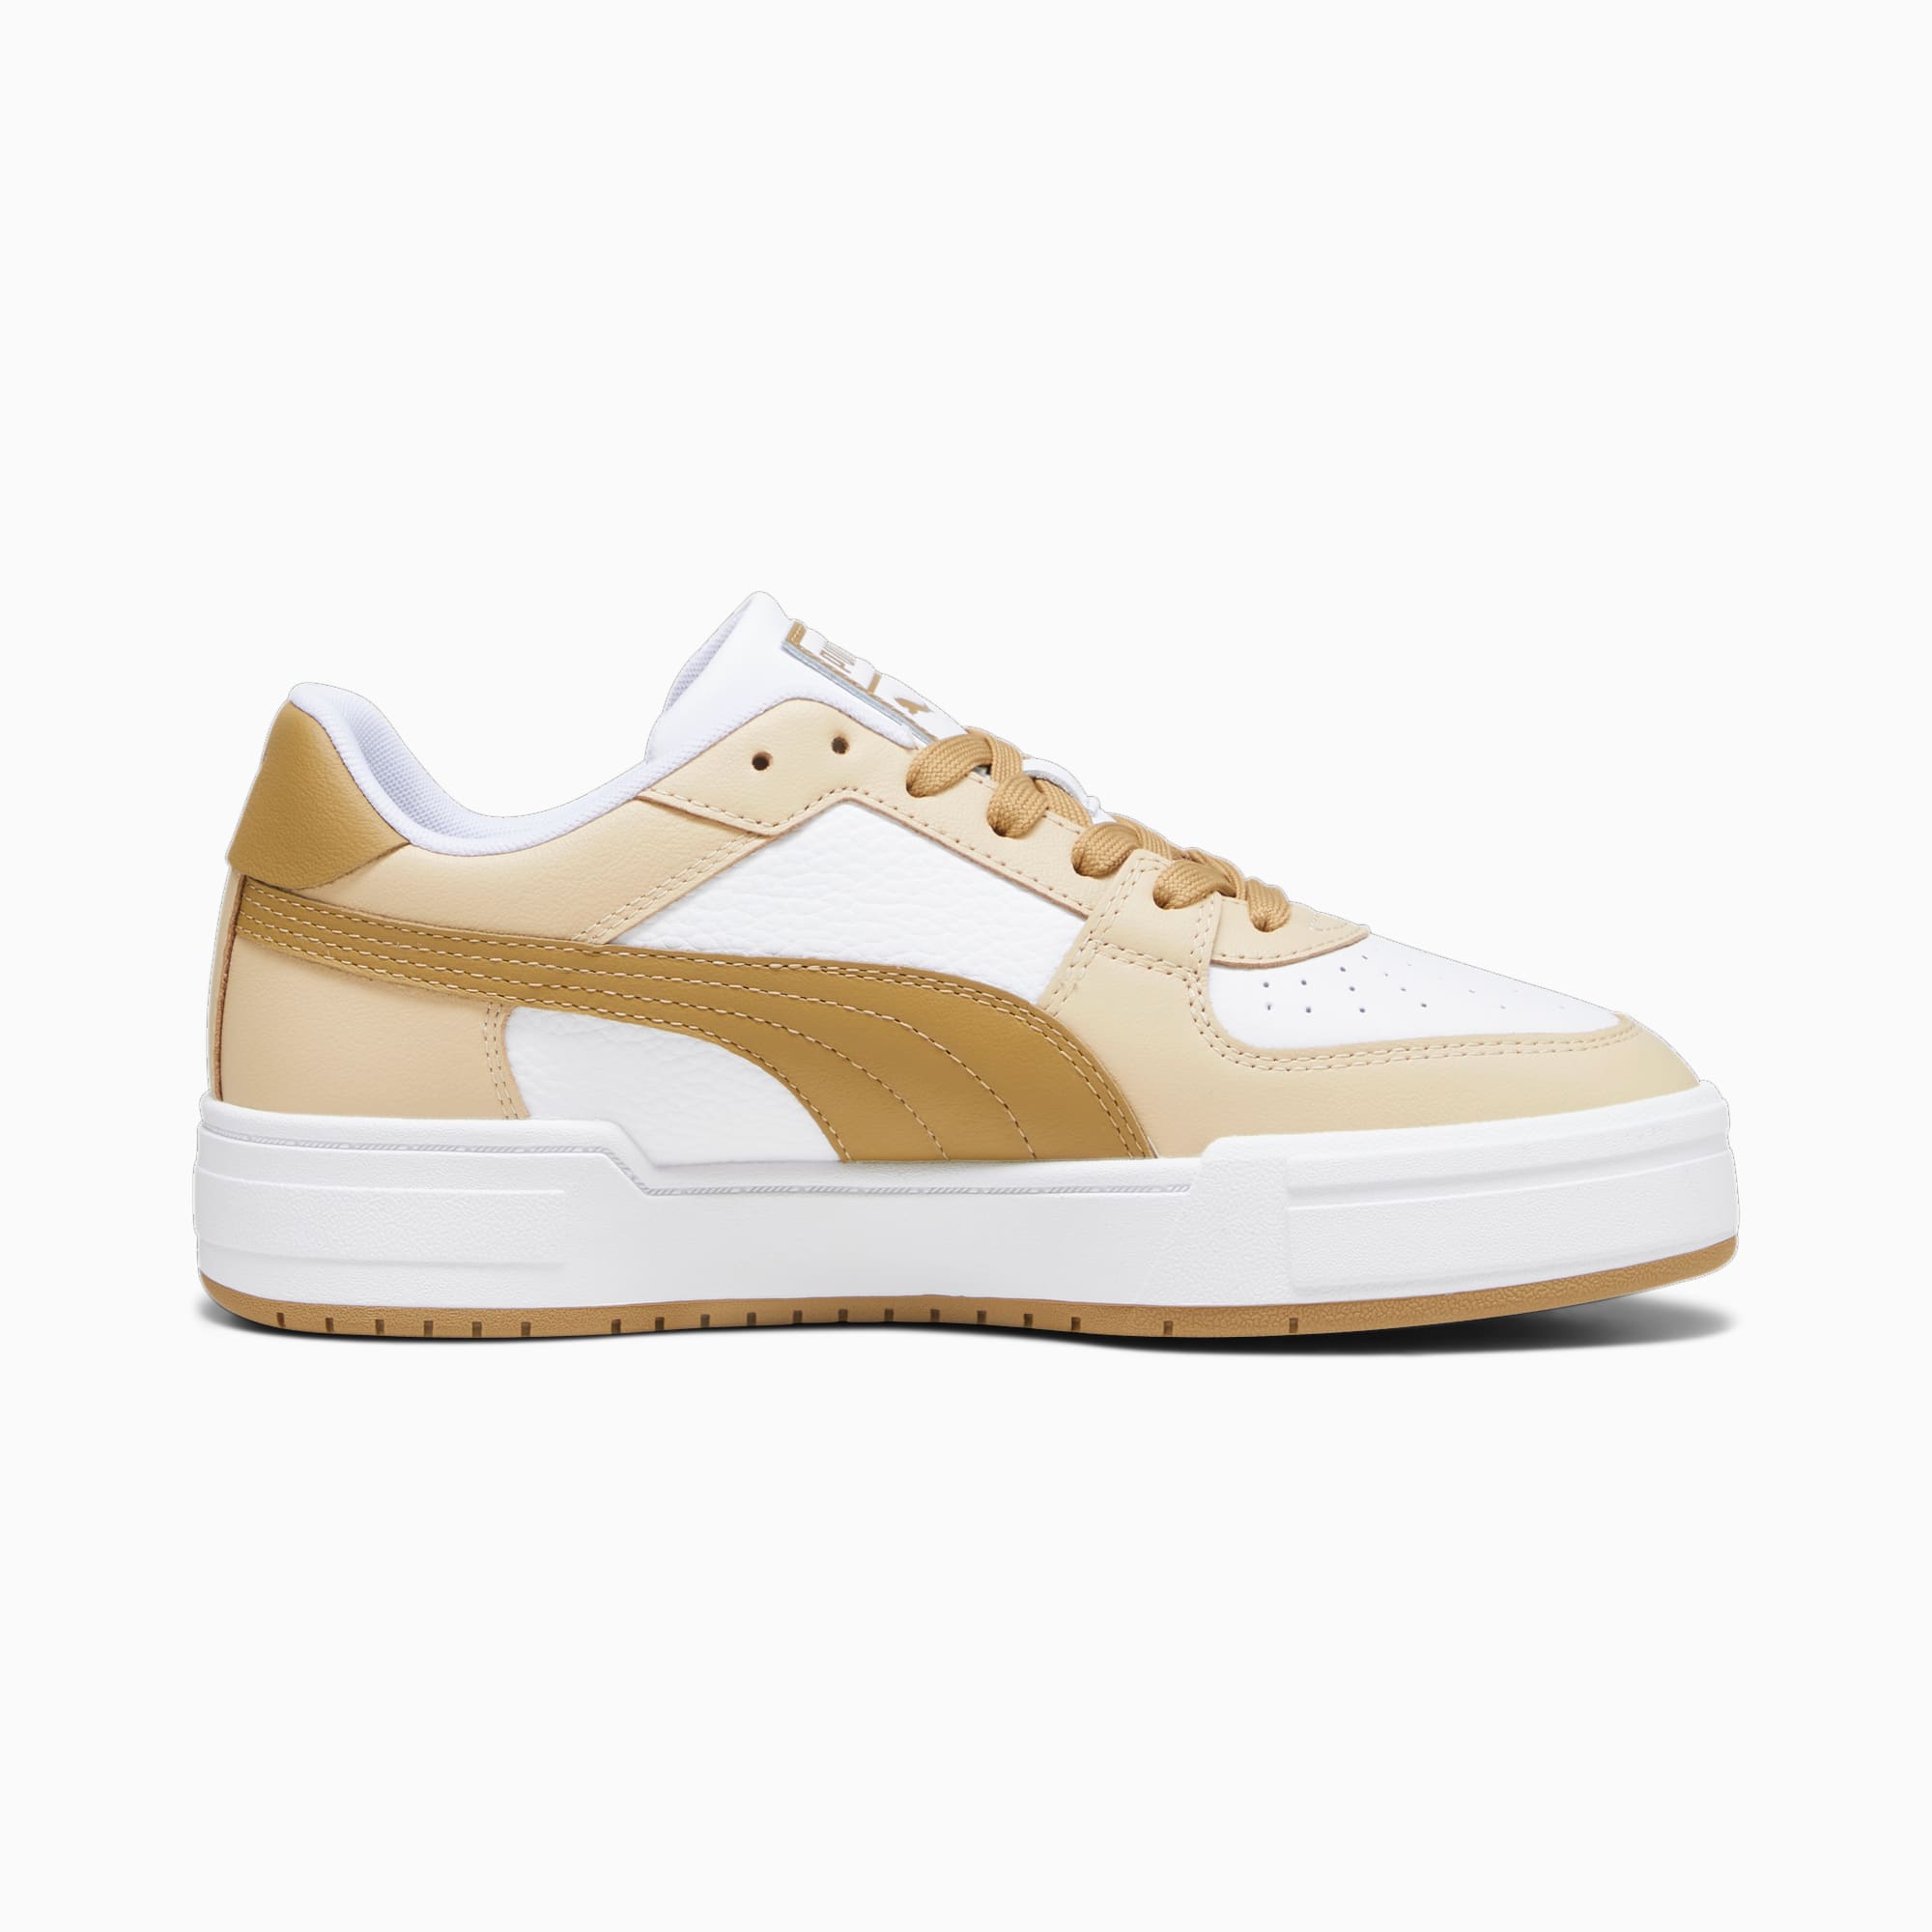 Women's PUMA Ca Pro Classic Trainers, White/Granola/Toasted, Size 52, Shoes